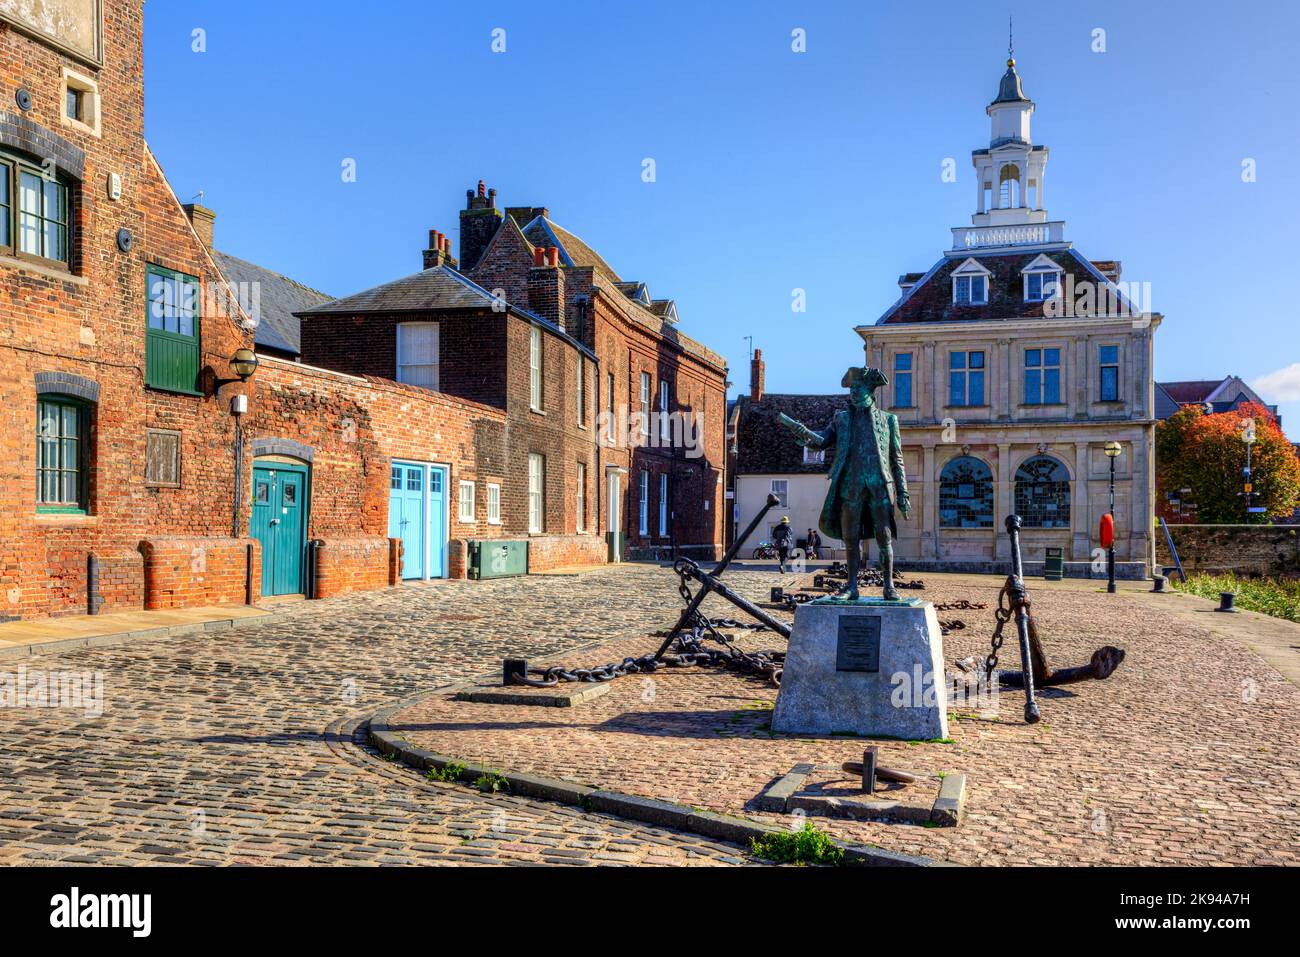 King's Lynn, Norfolk, Angleterre, Royaume-Uni Banque D'Images